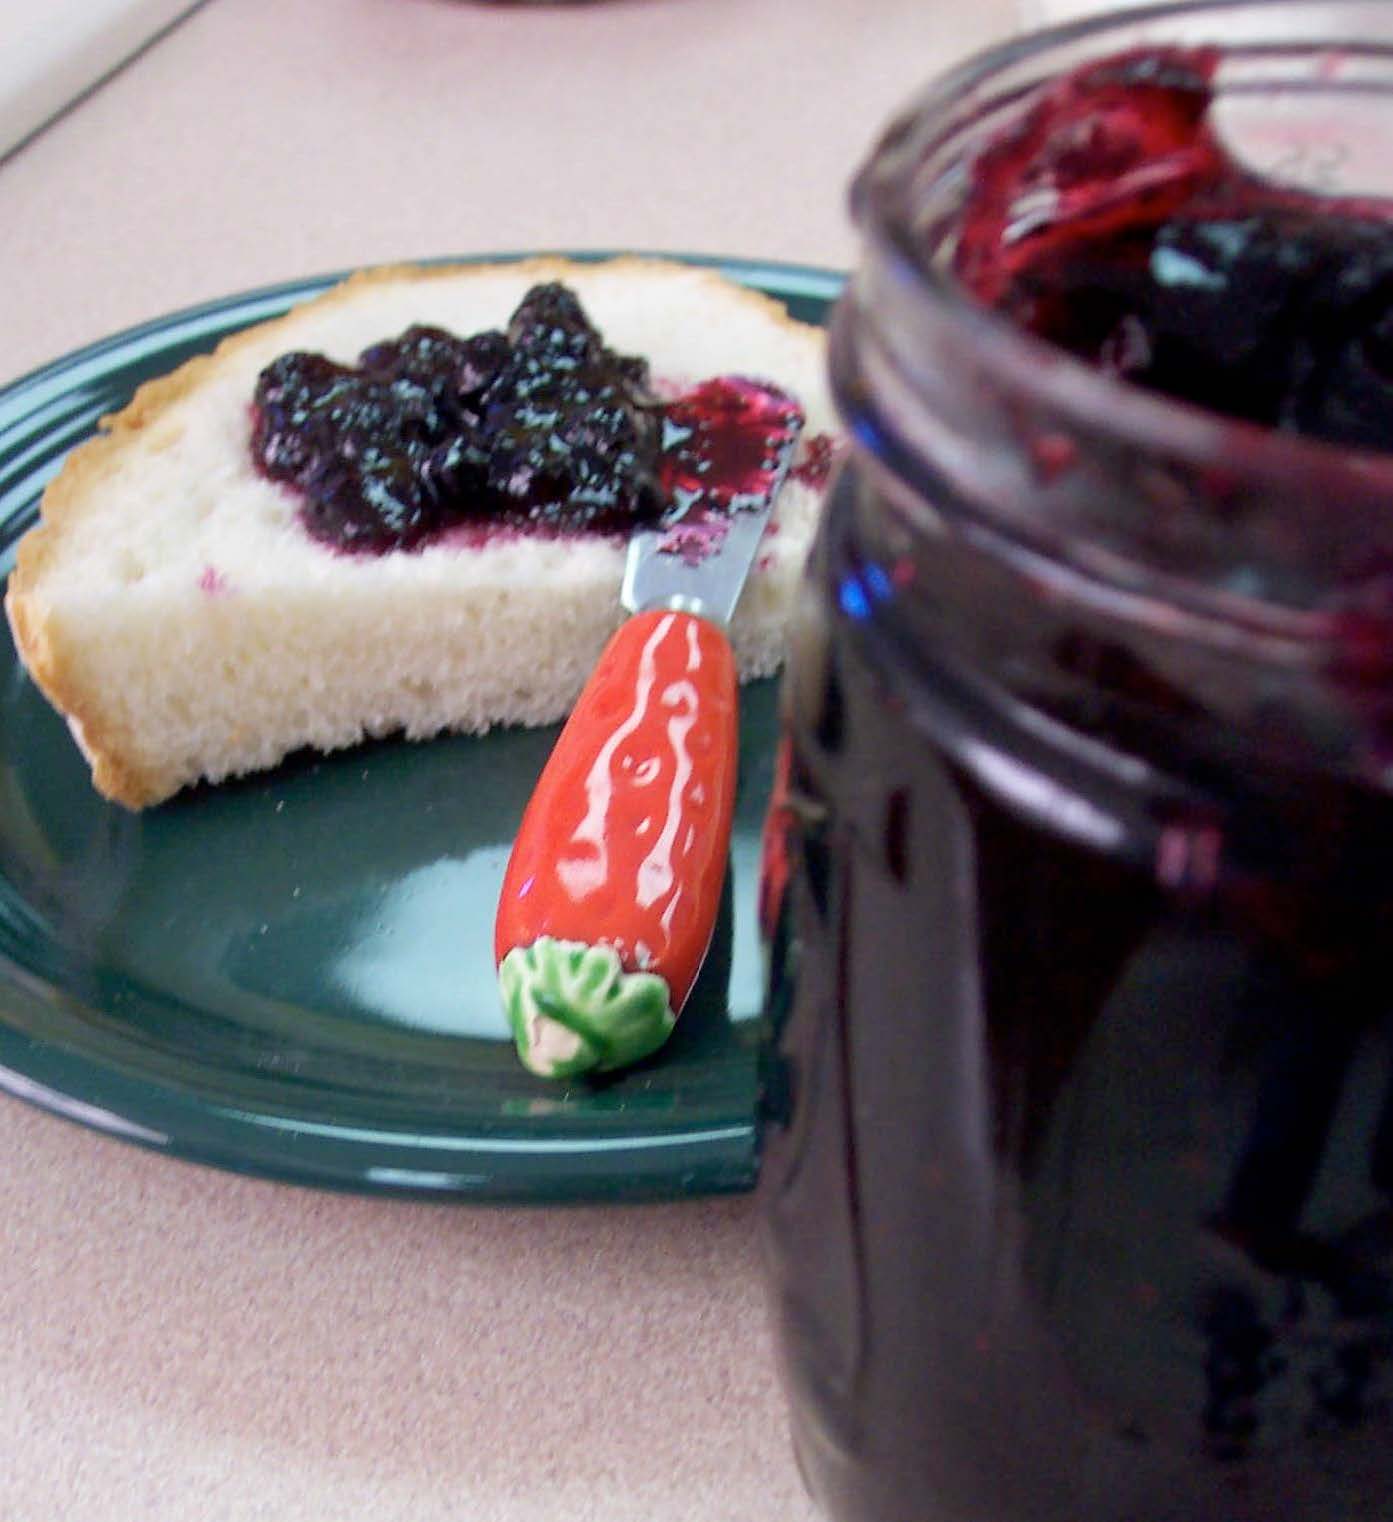 Blueberry jam spread on a piece of bread on a green plate on a table with the jam jar next to it.